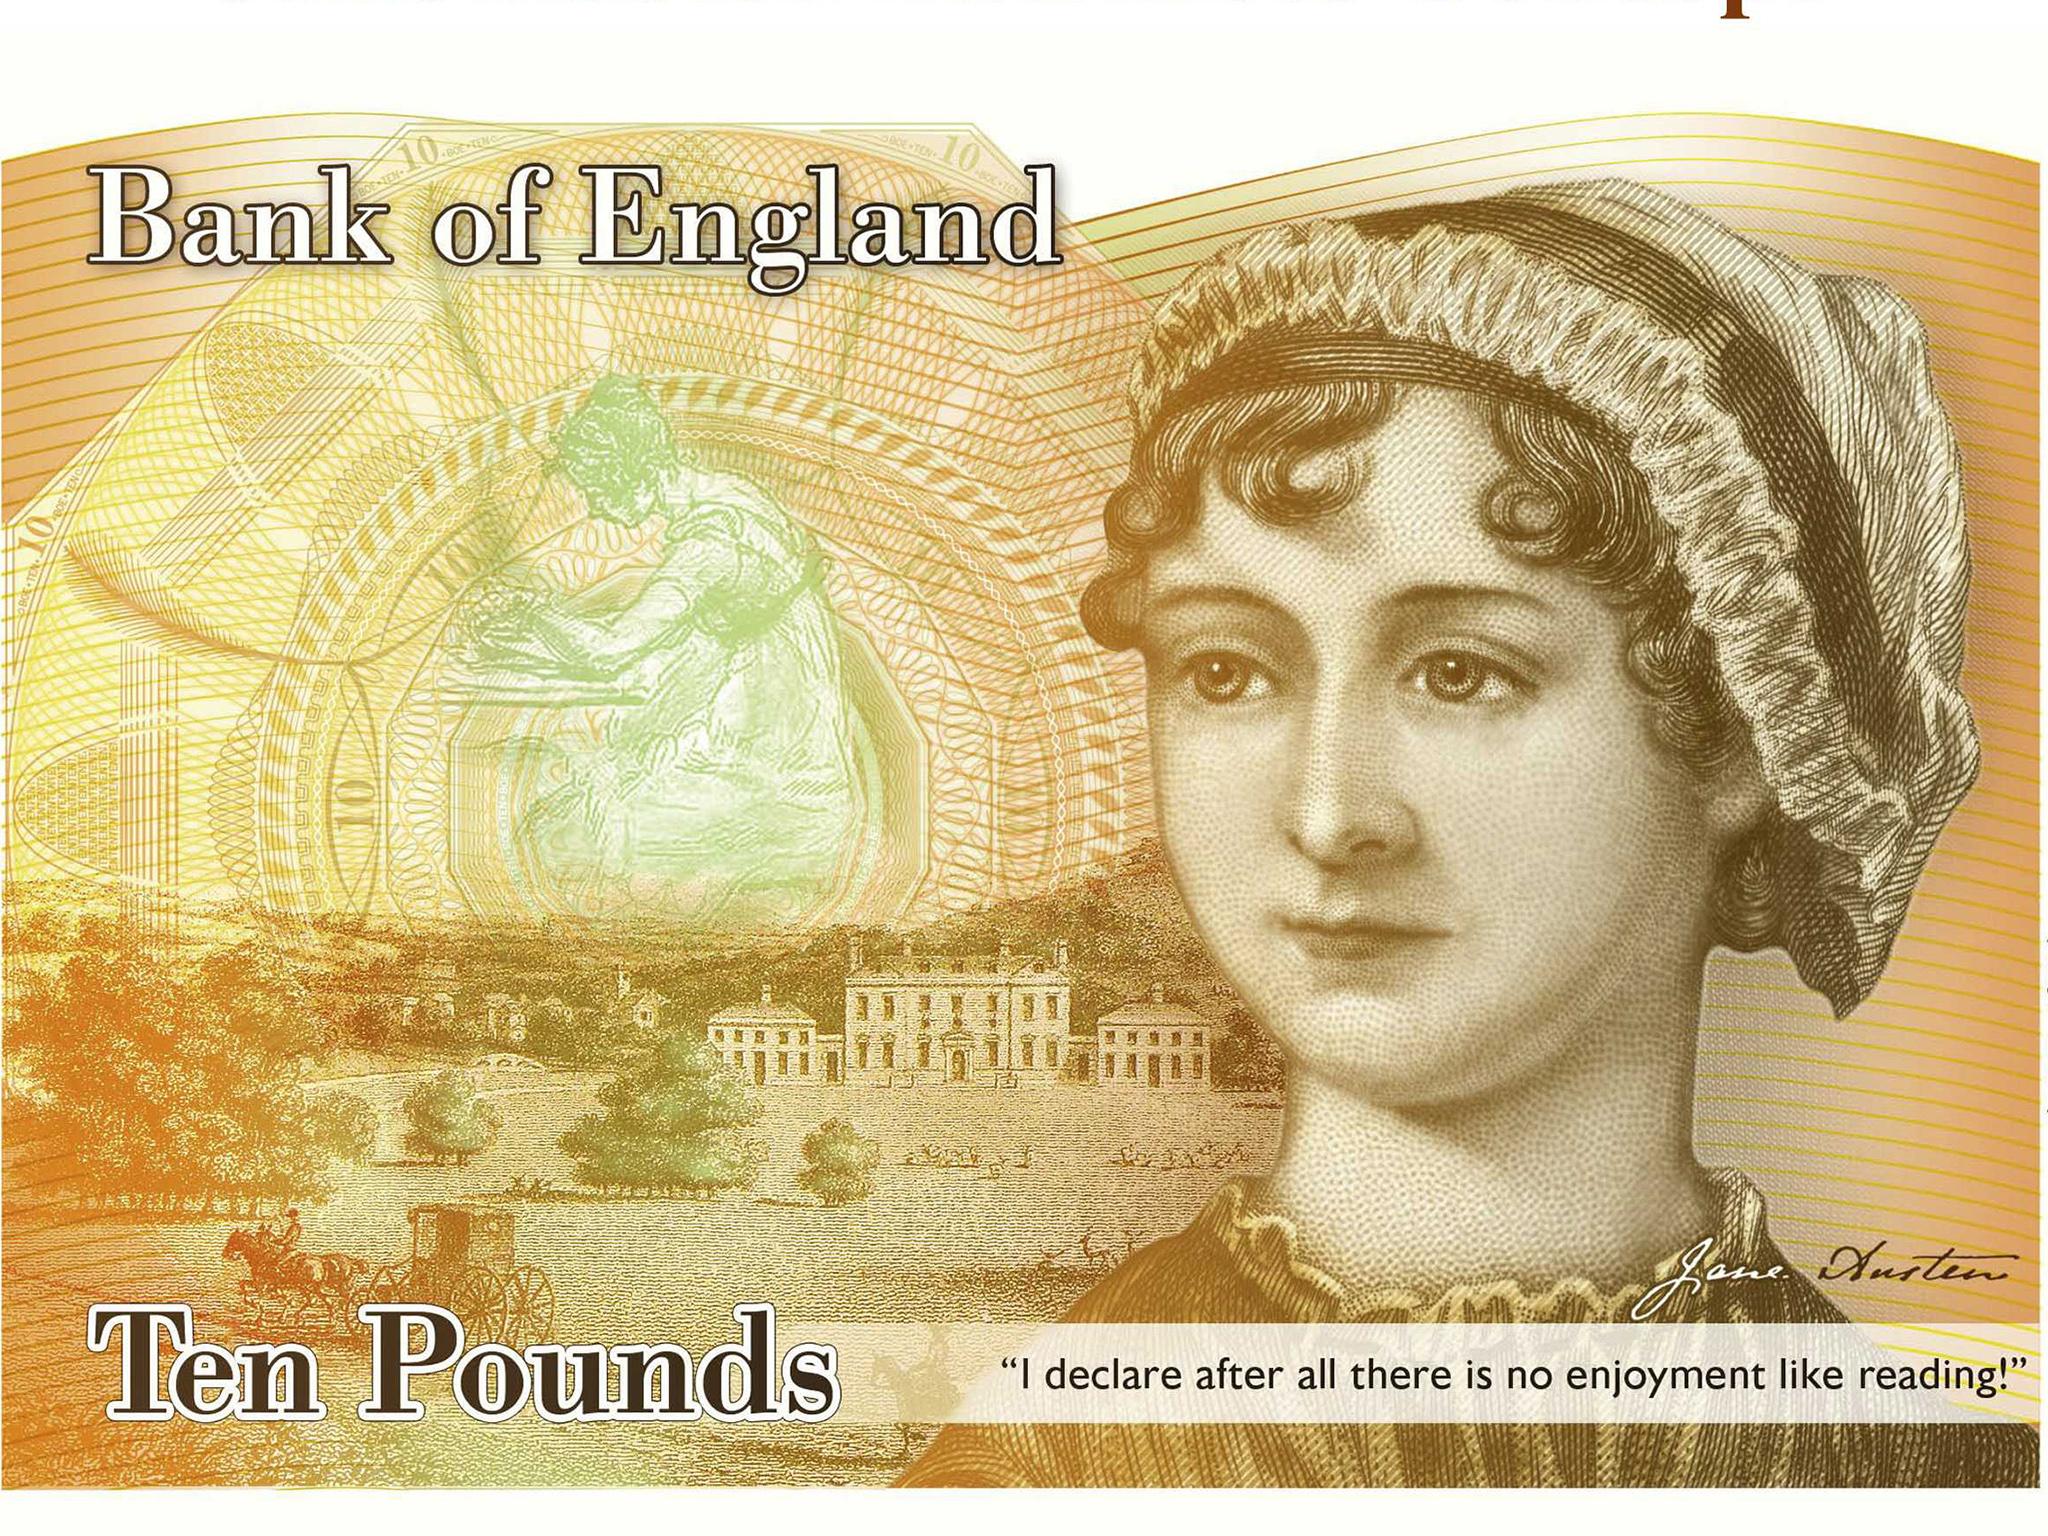 Jane Austen will feature on £10 notes from September. But whoever is on whichever note, someone will moan